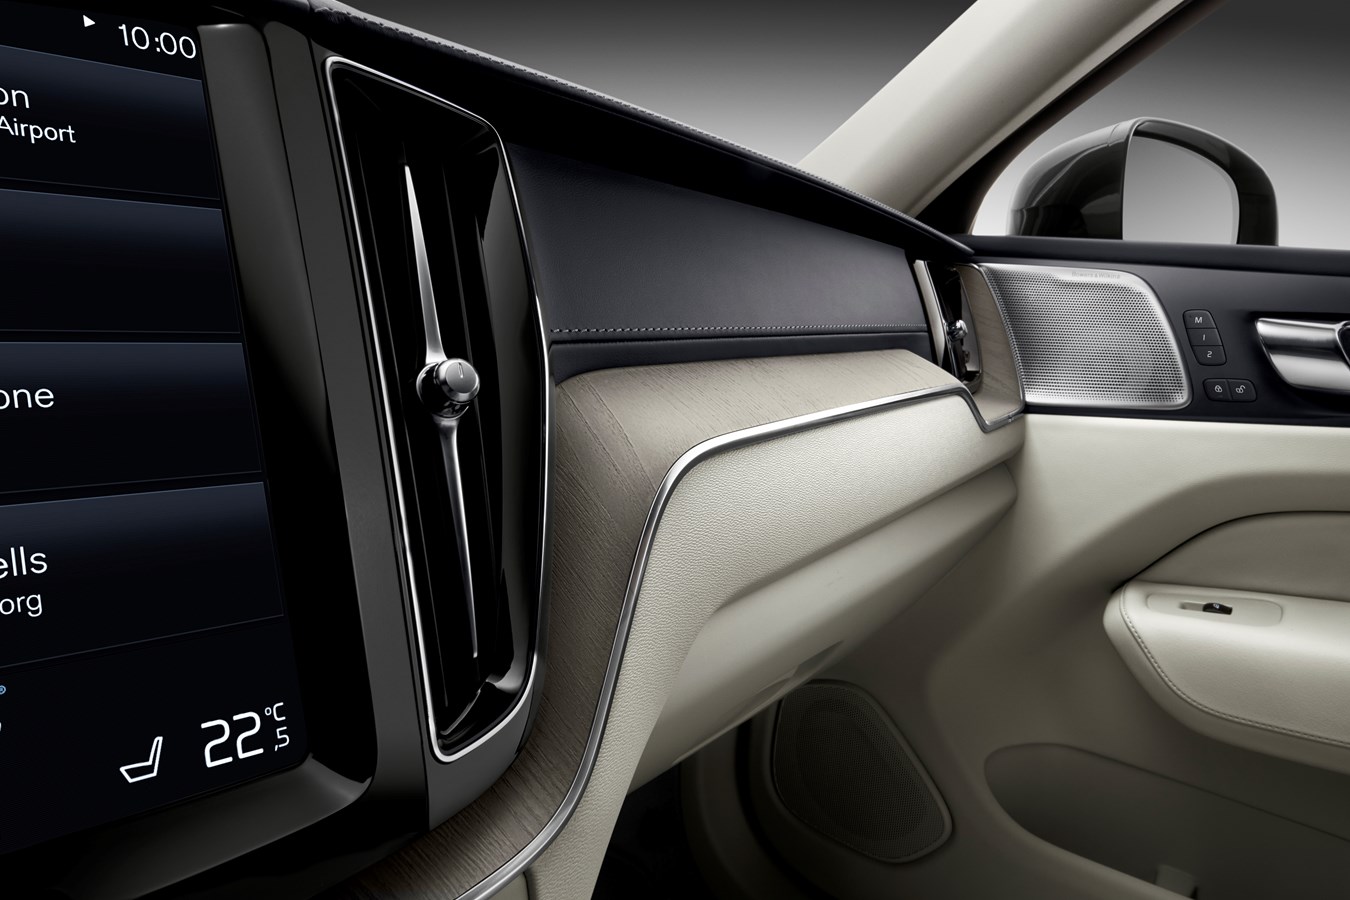 XC60 Inscription expression, Leather Fine Nappa Perforated Blond in Blond/Charcoal interior